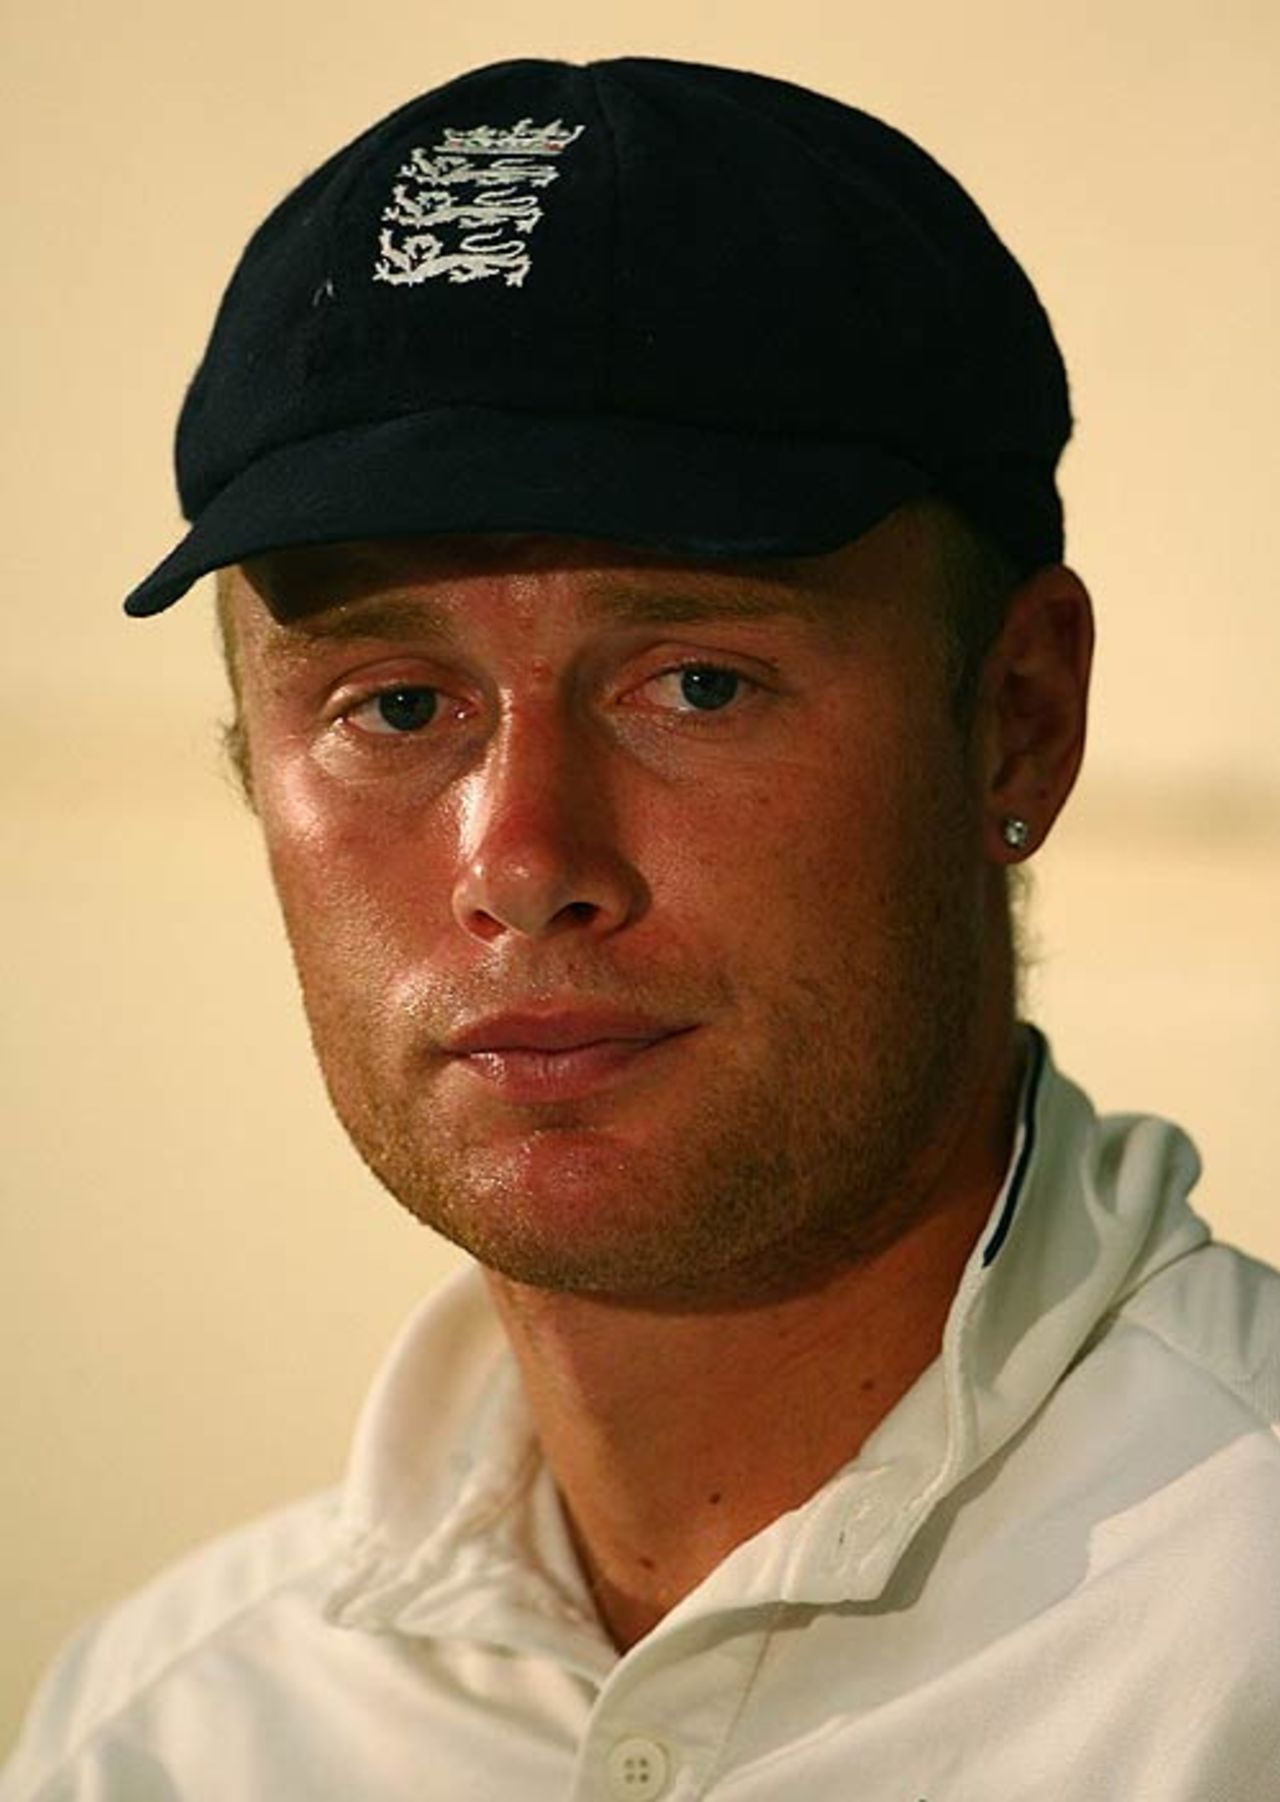 A dejected Andrew Flintoff faces the media after leading England to a 5-0 Ashes loss, Australia v England, 5th Test, Sydney, January 5, 2007